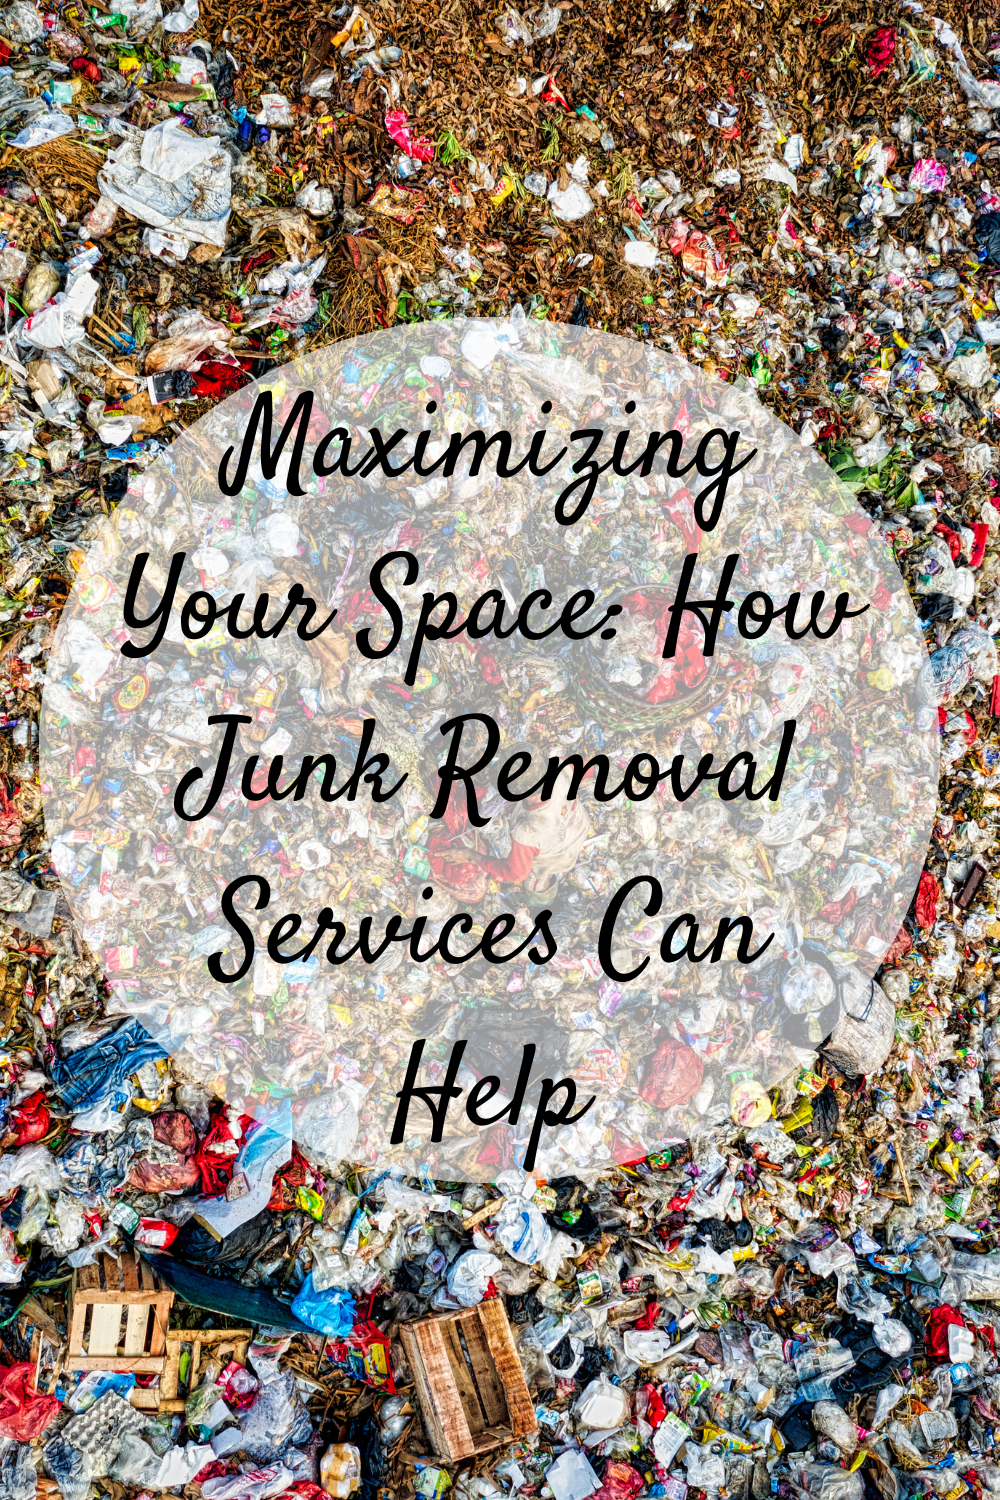 Maximizing Your Space: How Junk Removal Services Can Help